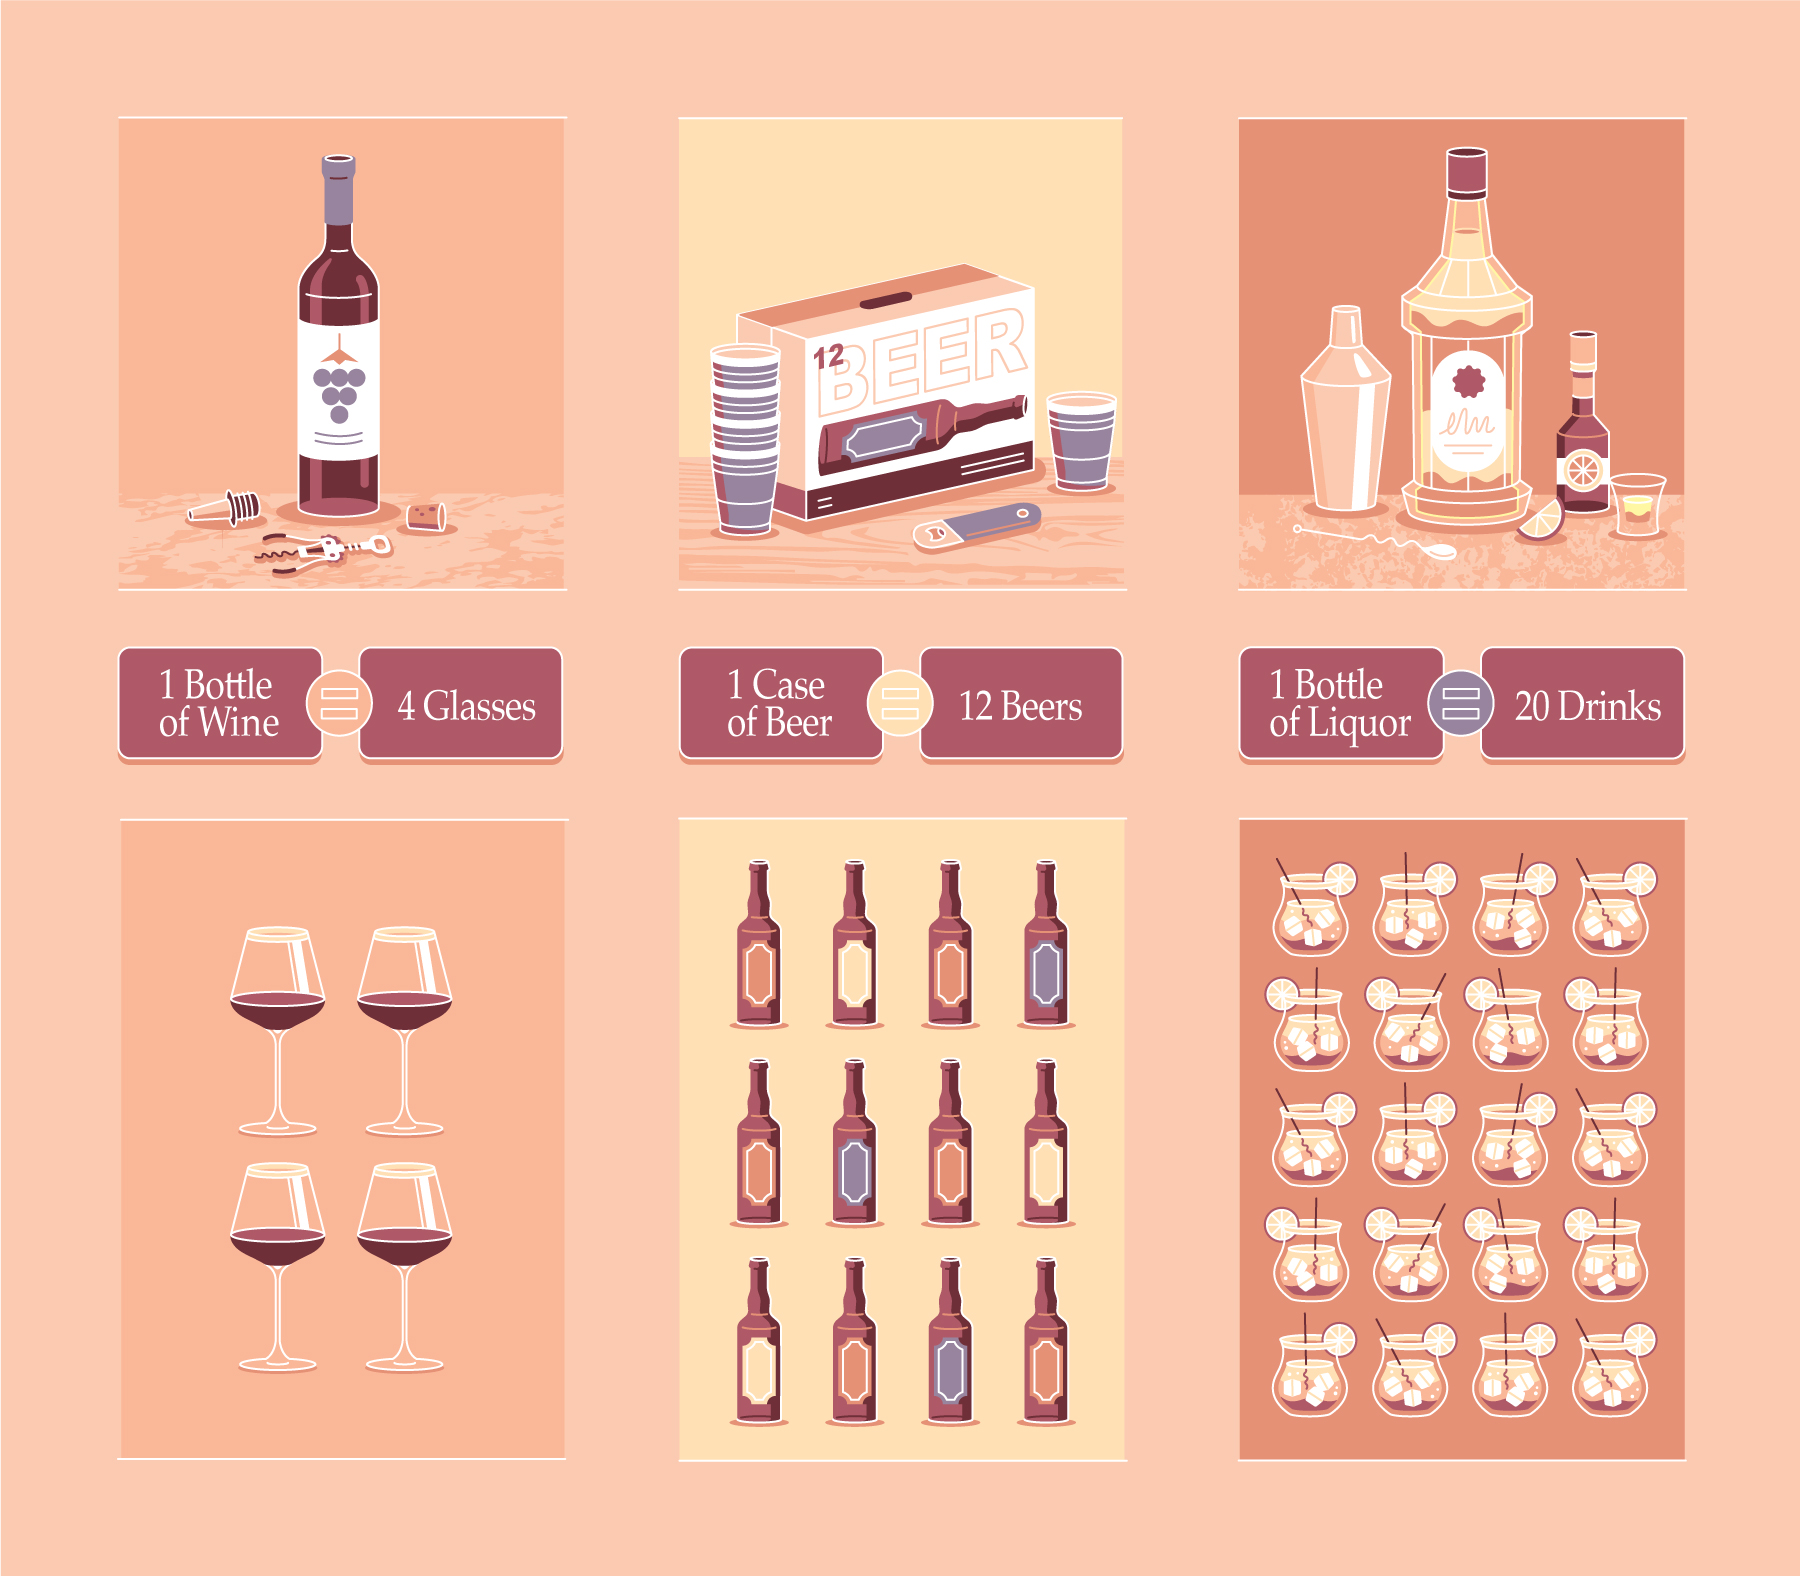 Use Our Drinks Chart to Plan Soft Drinks and Alcohol for a Party